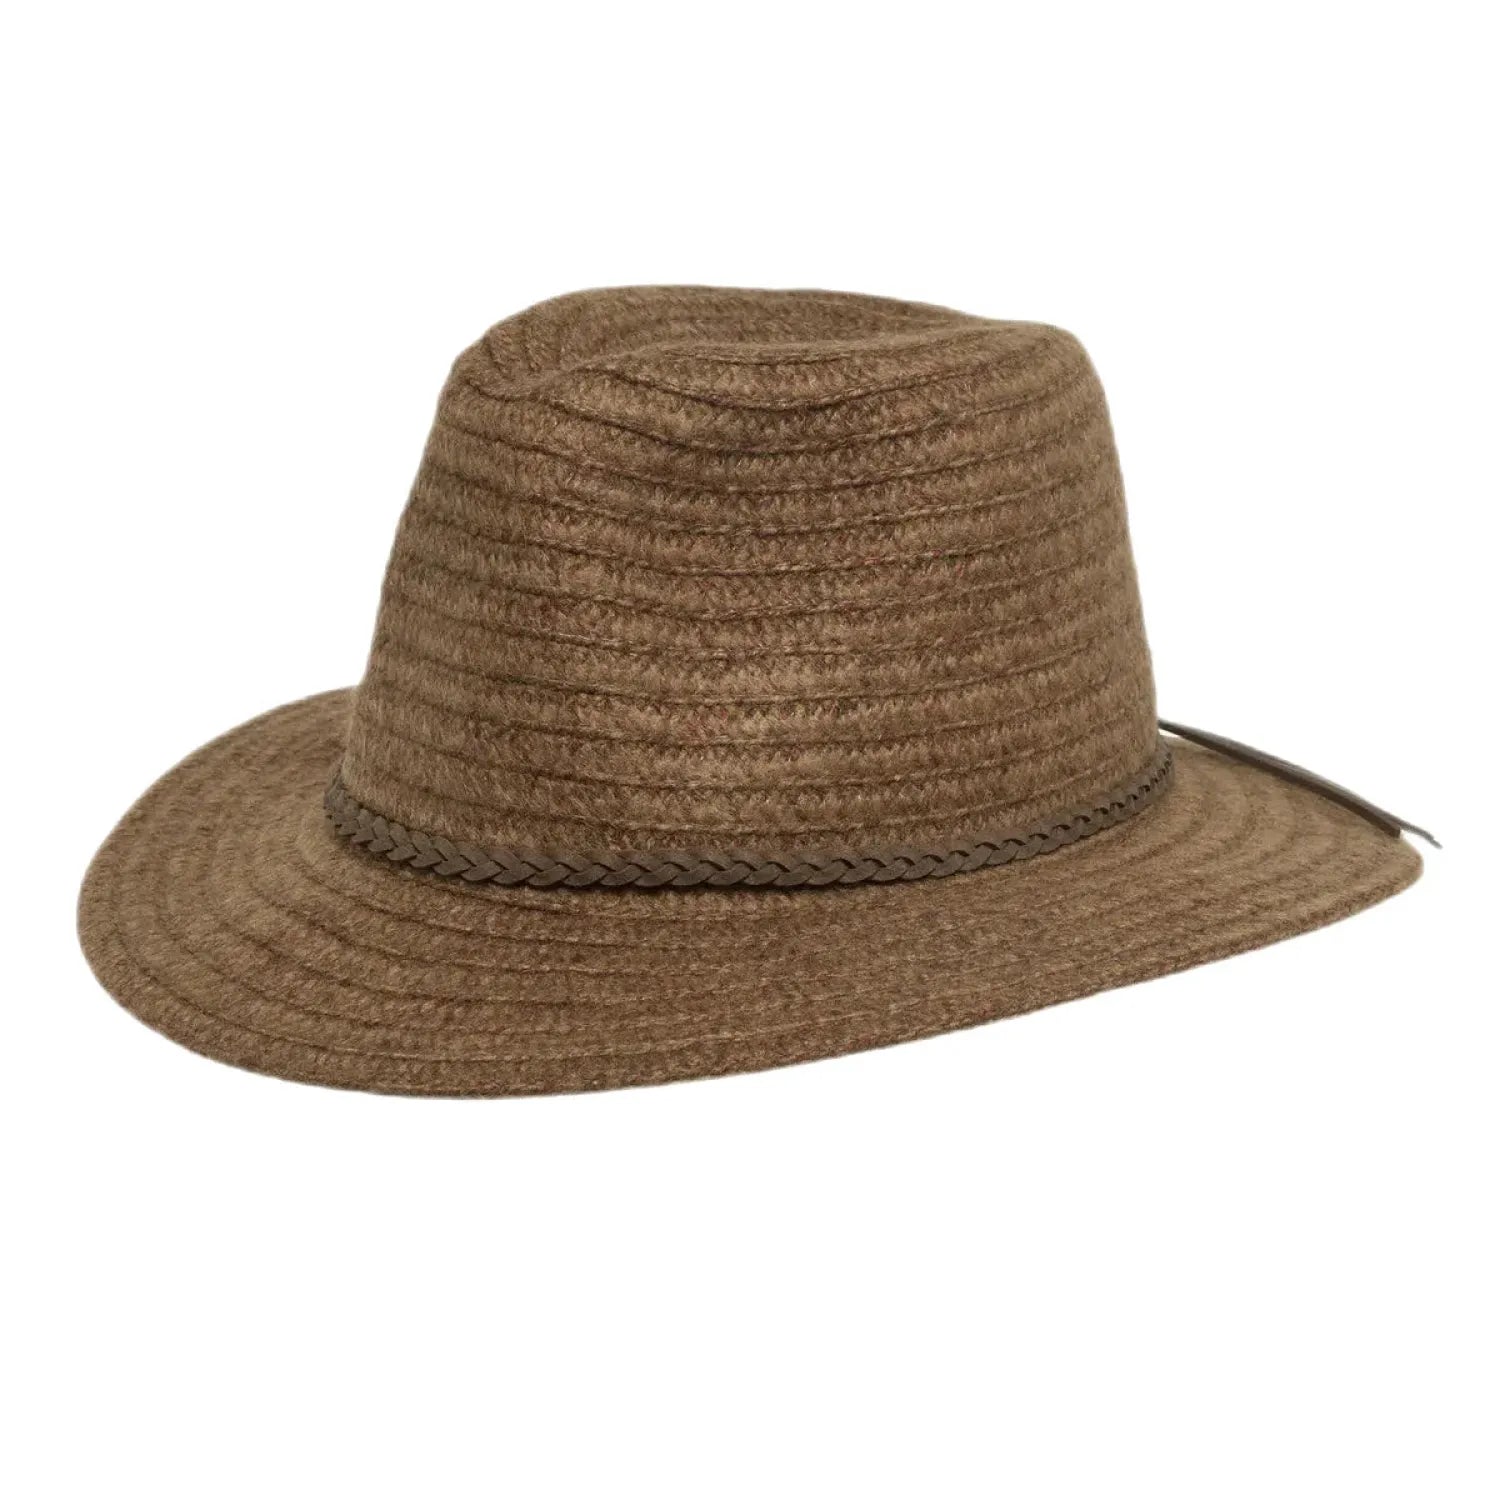 Sunday Afternoons Camden Hat shown in chestnut brown color.